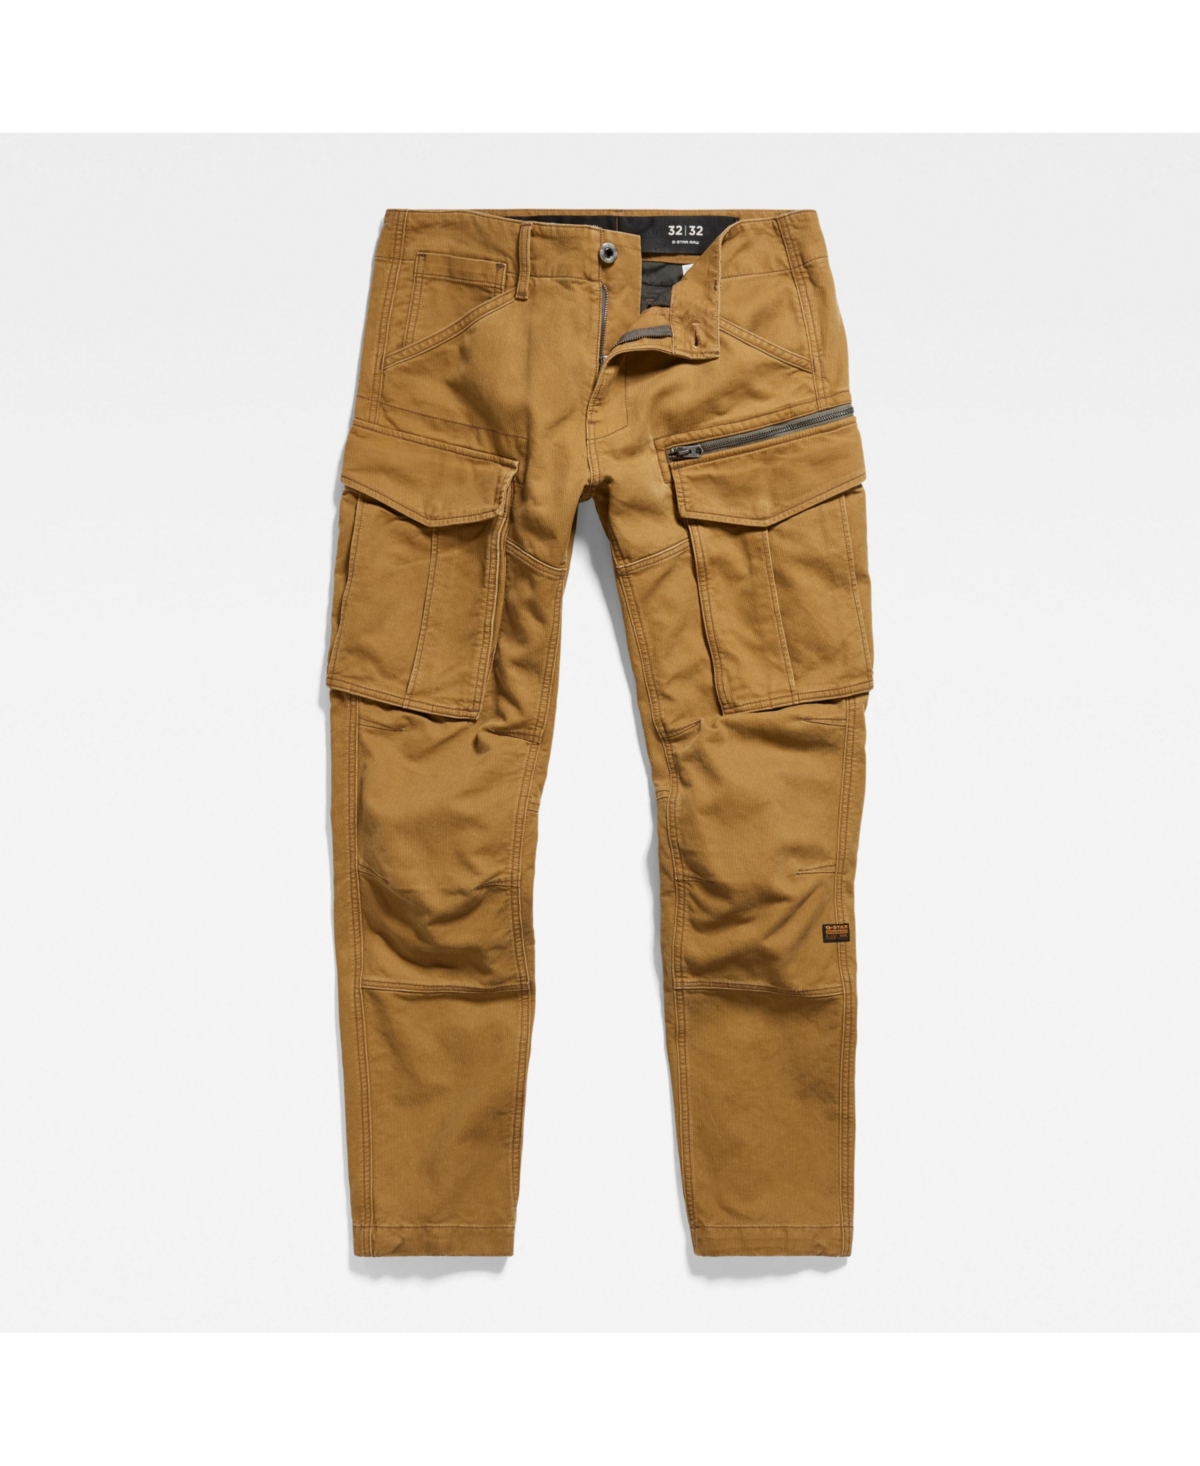 G-star Raw Rovic Zip 3d Regular Fit Tapered Pants In Tobacco